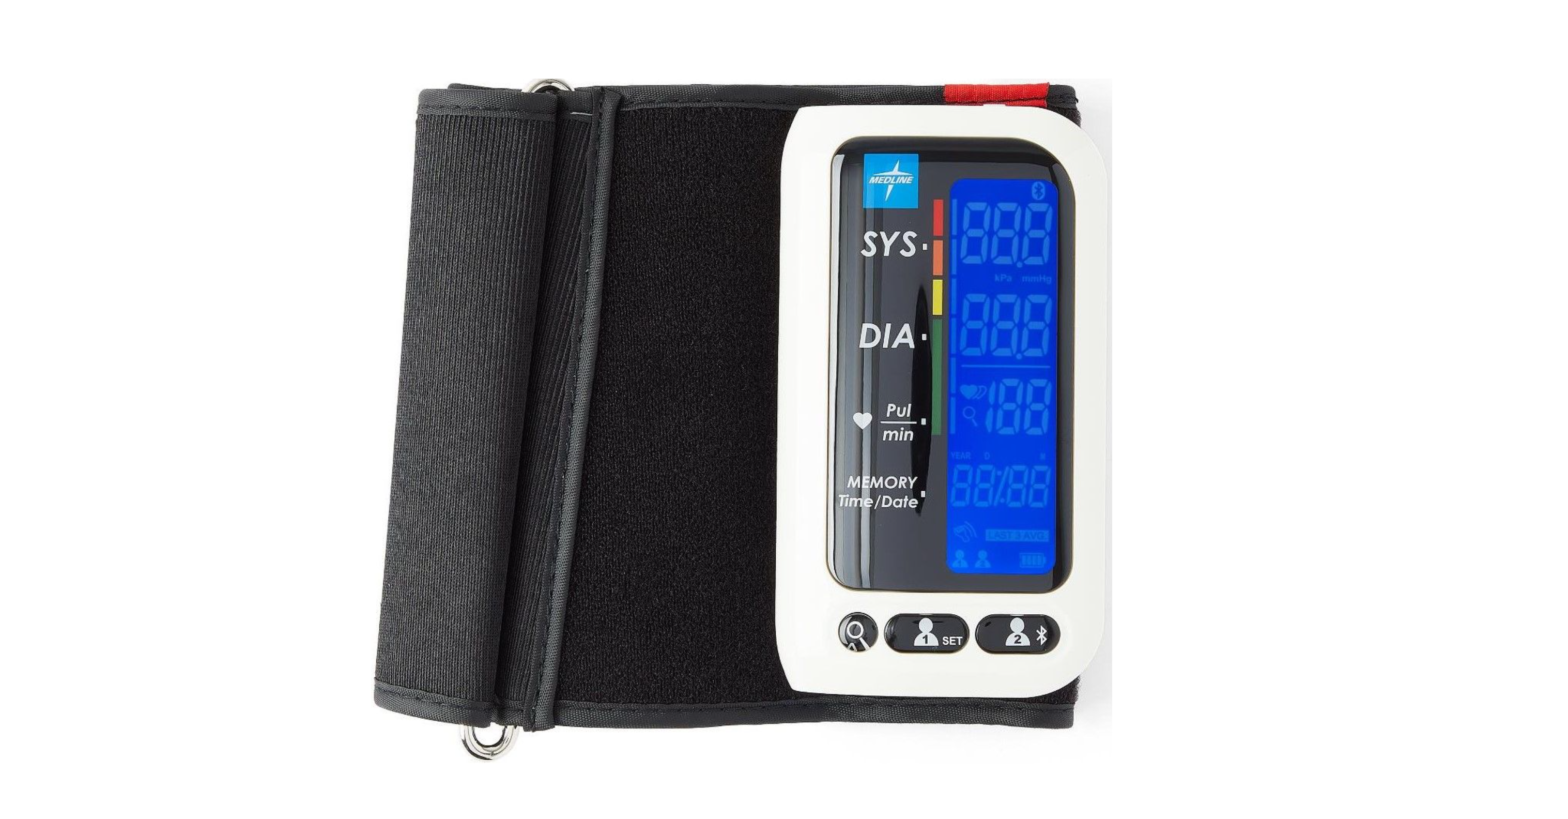 MEDLINE MDS7001B Blood Pressure Monitor with Bluetooth User Manual